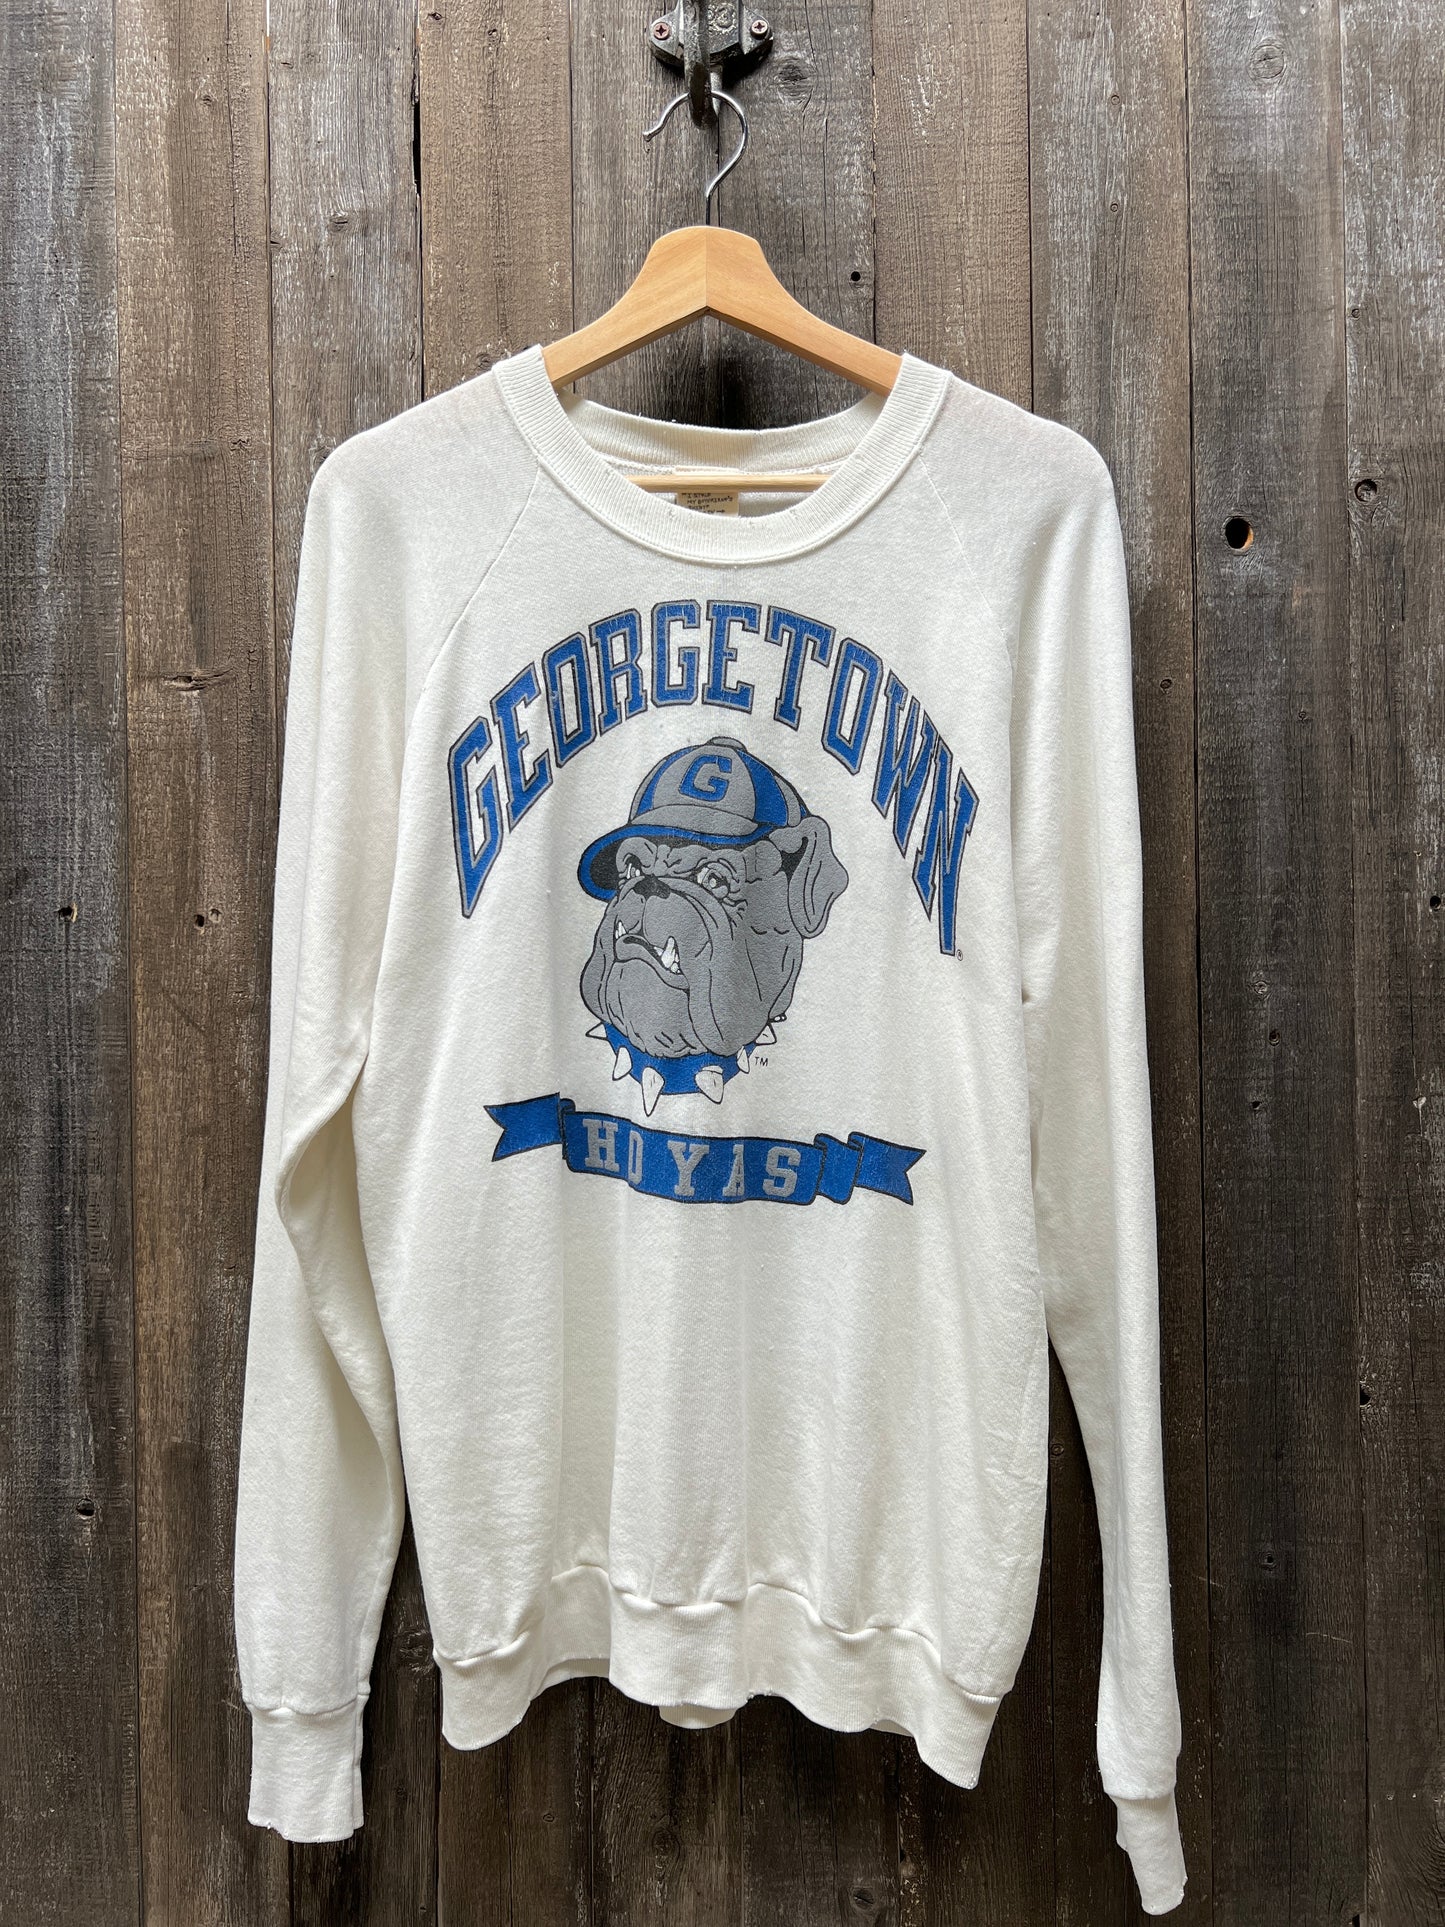 Georgetown Sweatshirt - M/L-Customize Your Embroidery Wording